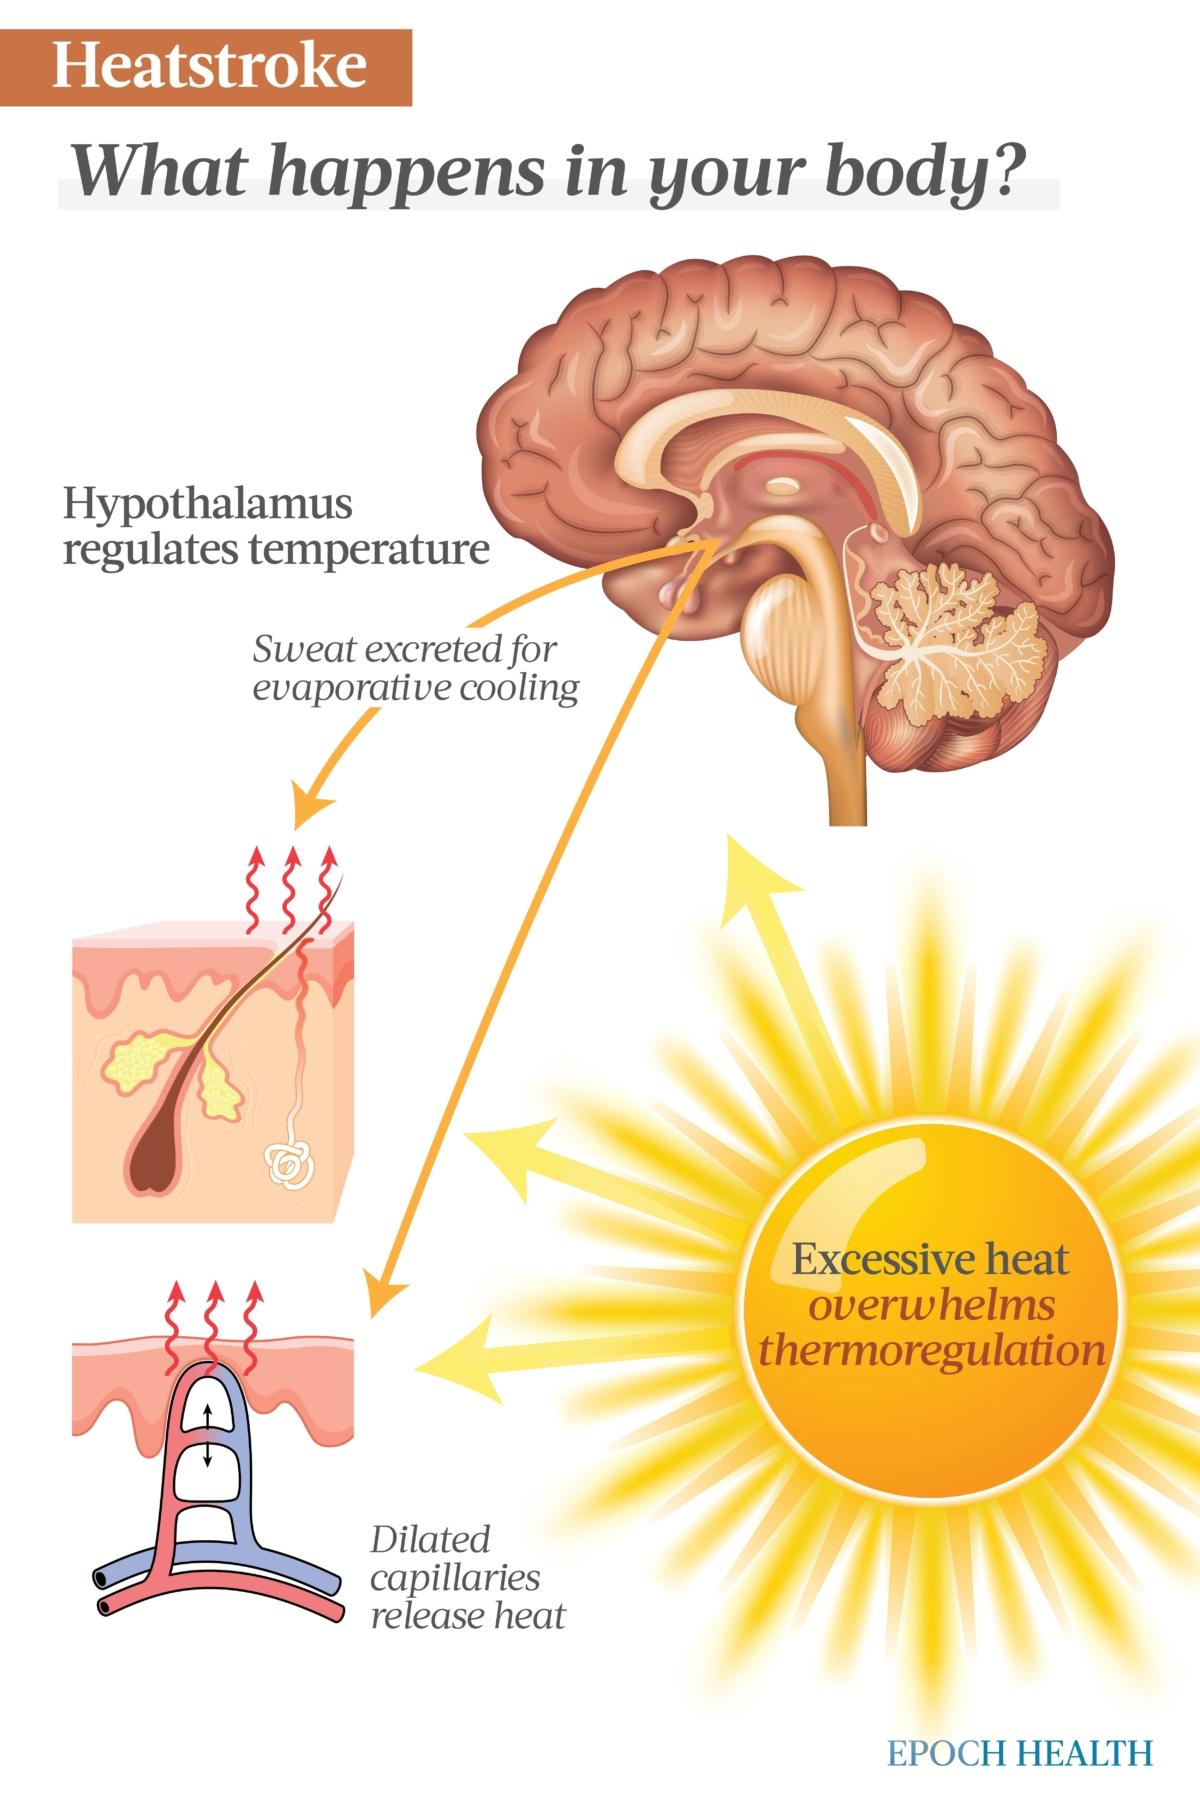  The hypothalamus oversees thermoregulation. When body temperature rises, the brain triggers the skin's sweat glands to excrete sweat and its capillaries to dilate to release heat in an effort to cool the body. When the heat becomes excessive, whether from the environment or exertion, the system becomes overwhelmed and fails, resulting in heatstroke. (The Epoch Times)